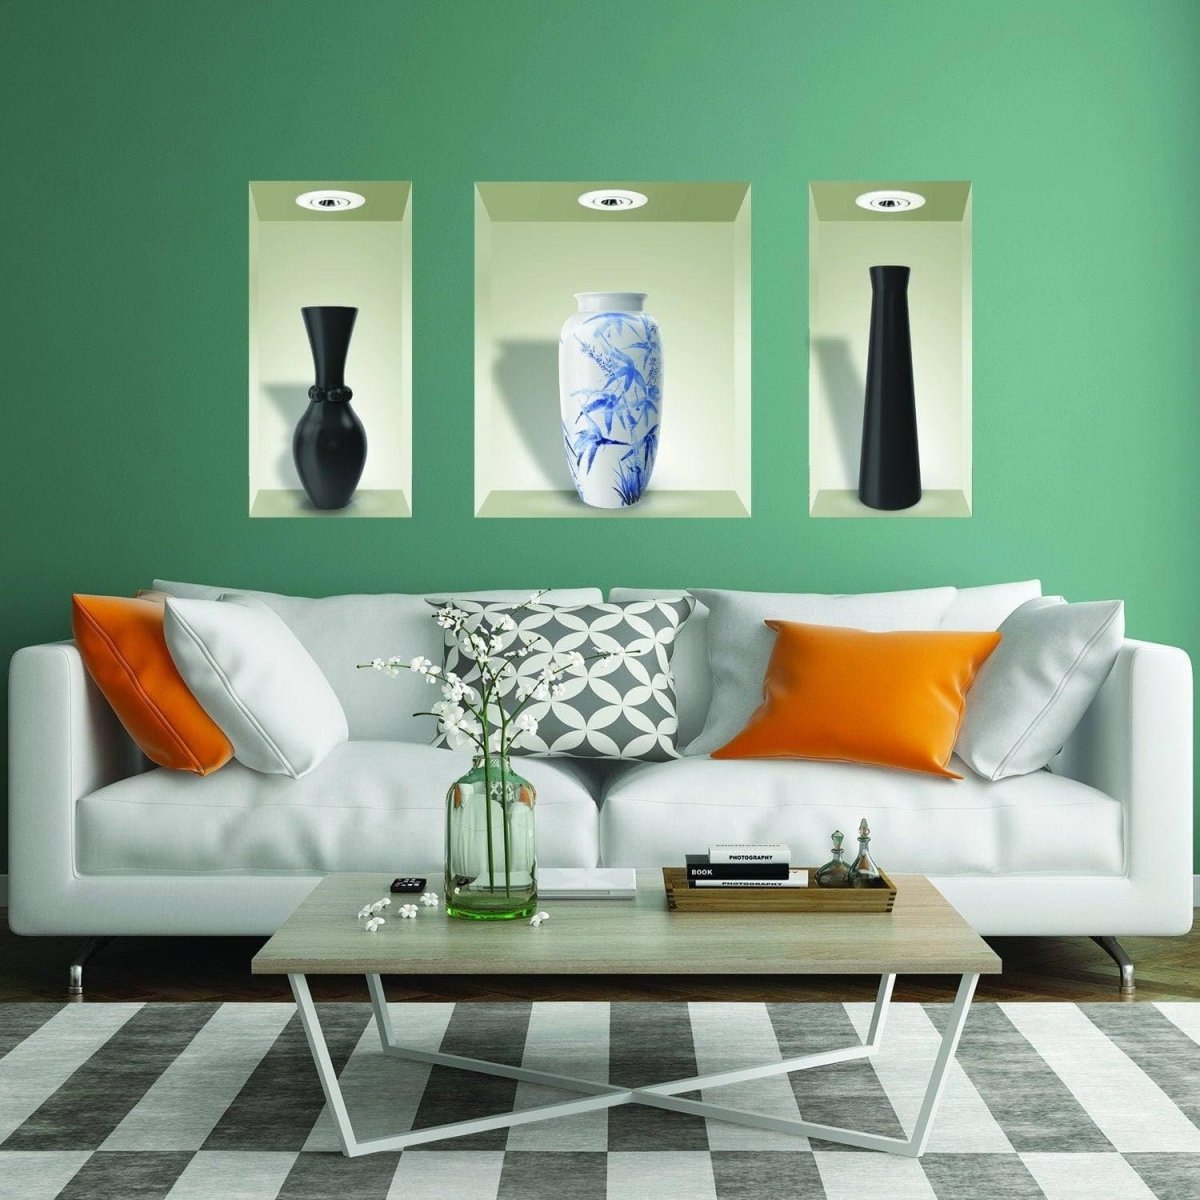 Floral Elegance Wall Decals: 3D Flowers in Vases - Decords